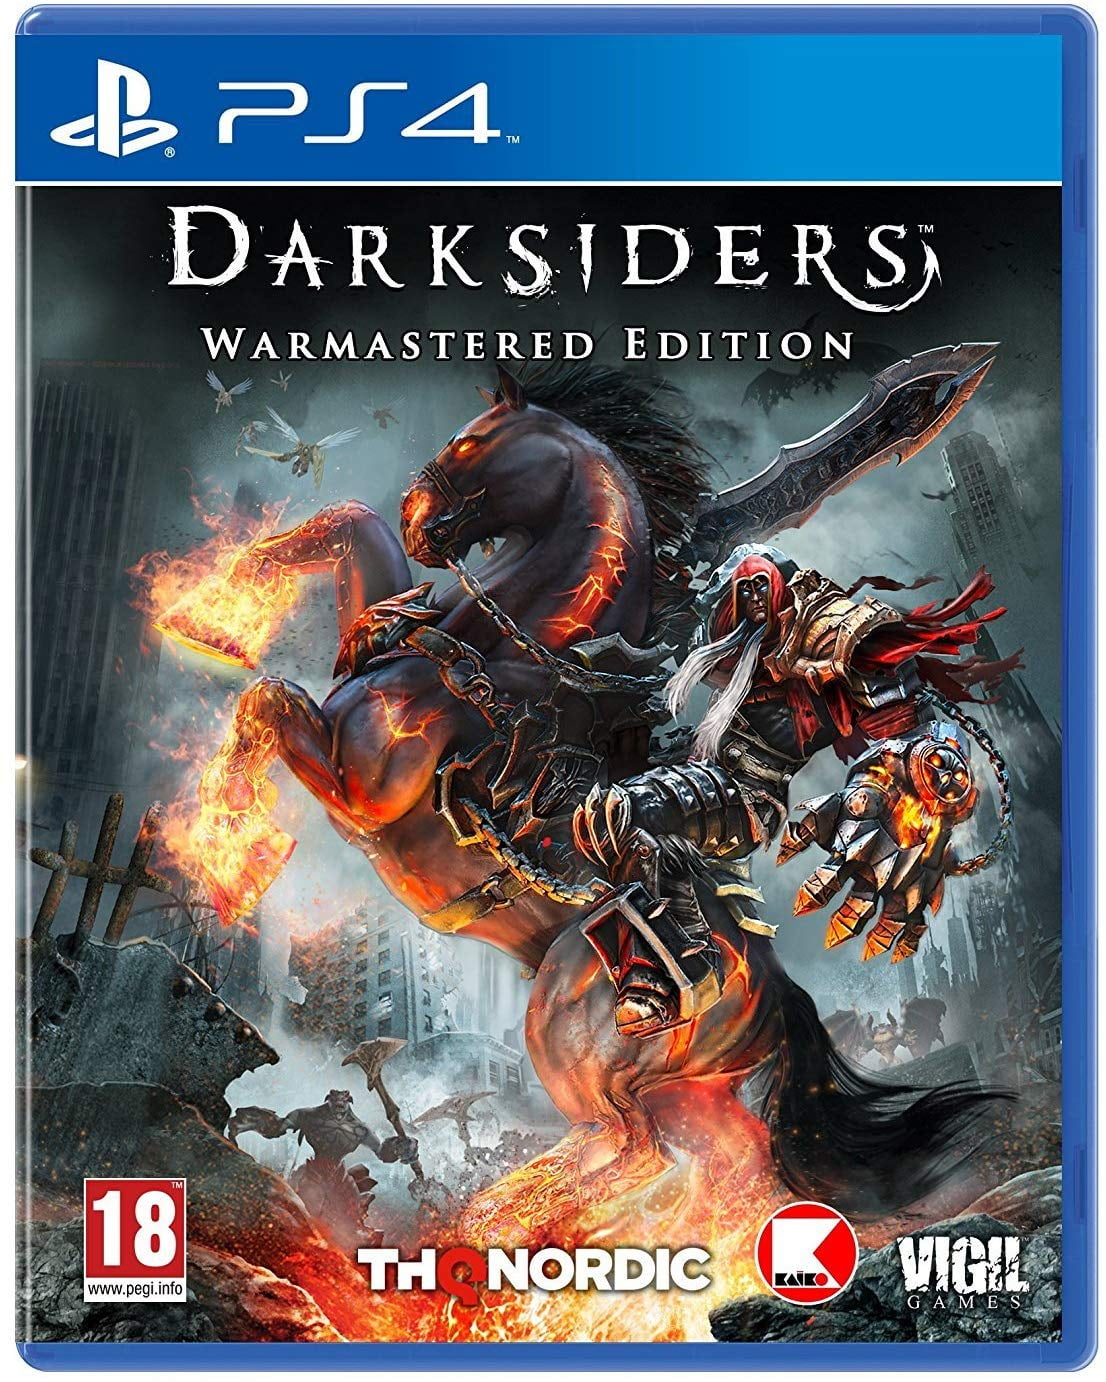 Darksiders Warmastered (PS4 Playstation 4) Epic Quest - Apocalyptic Extreme Arsenal - Character Progression -